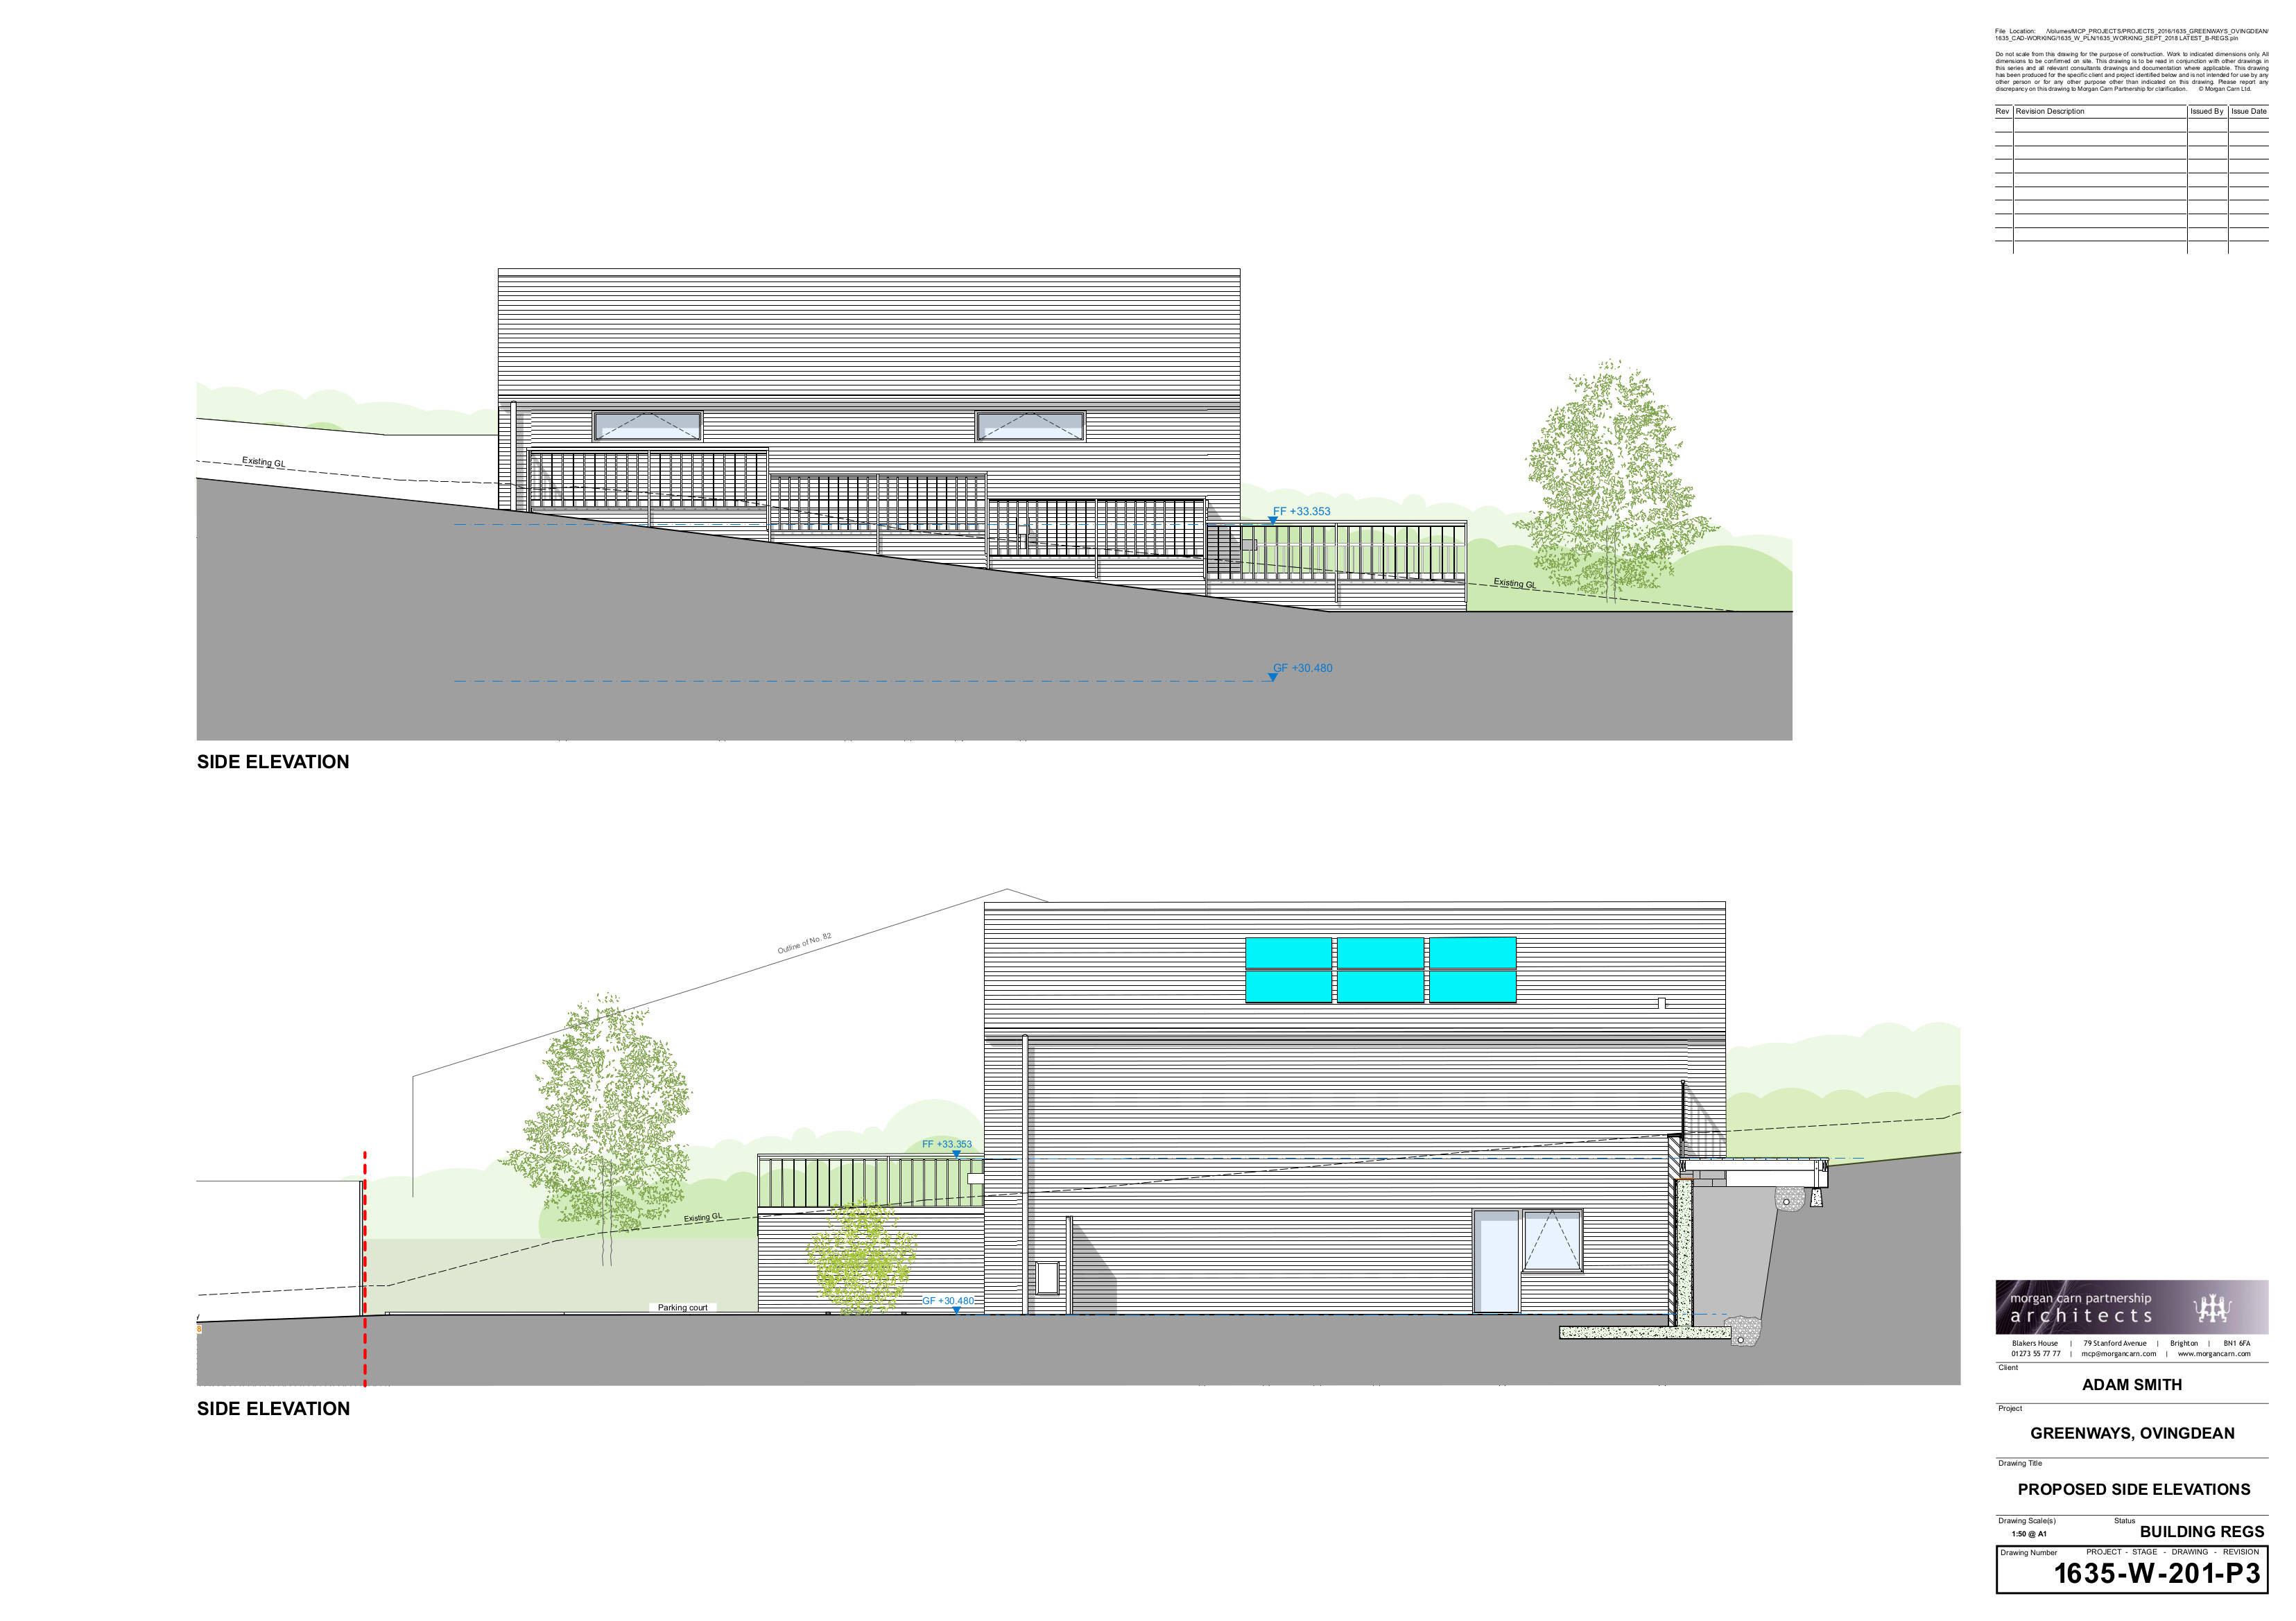 An image of From plans to reality, follow our new build project here goes here.